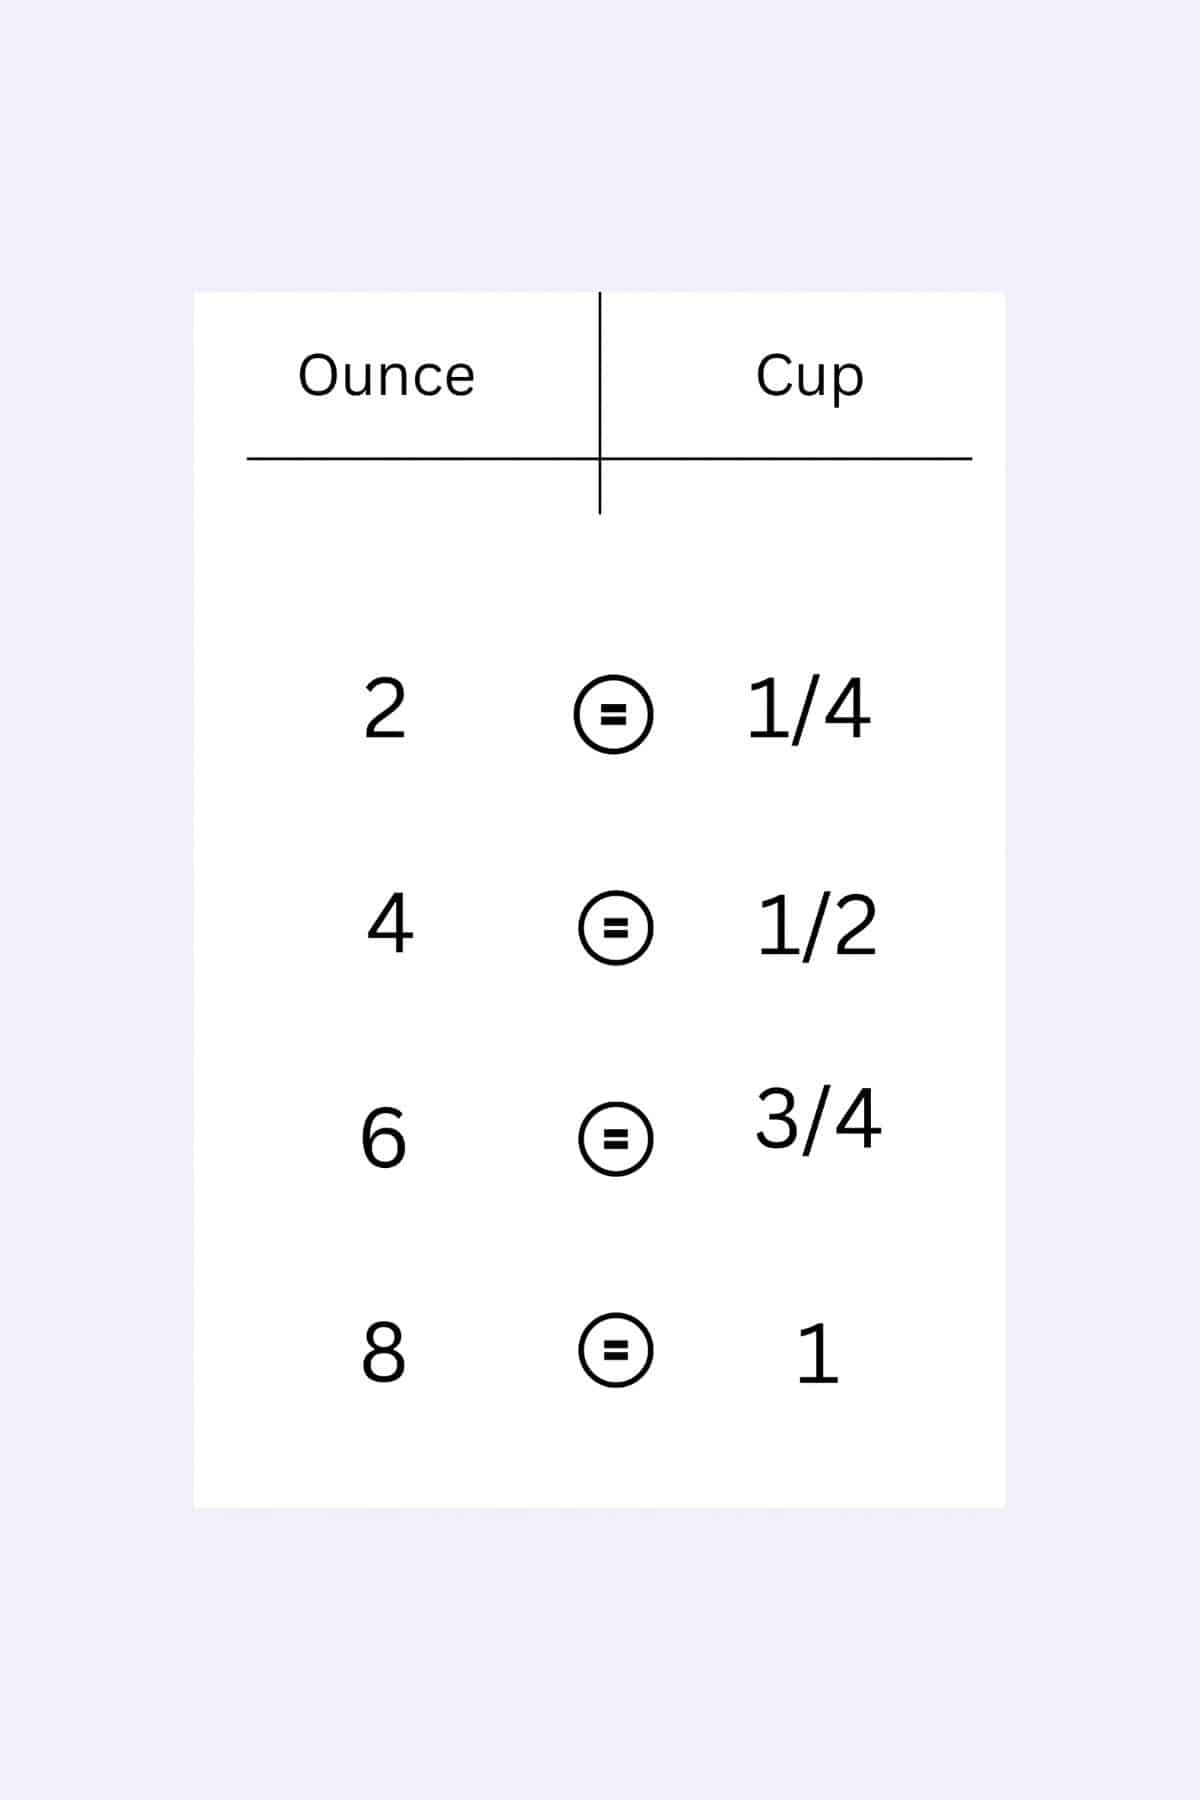 A chart showing equal measurements of cups and ounces.